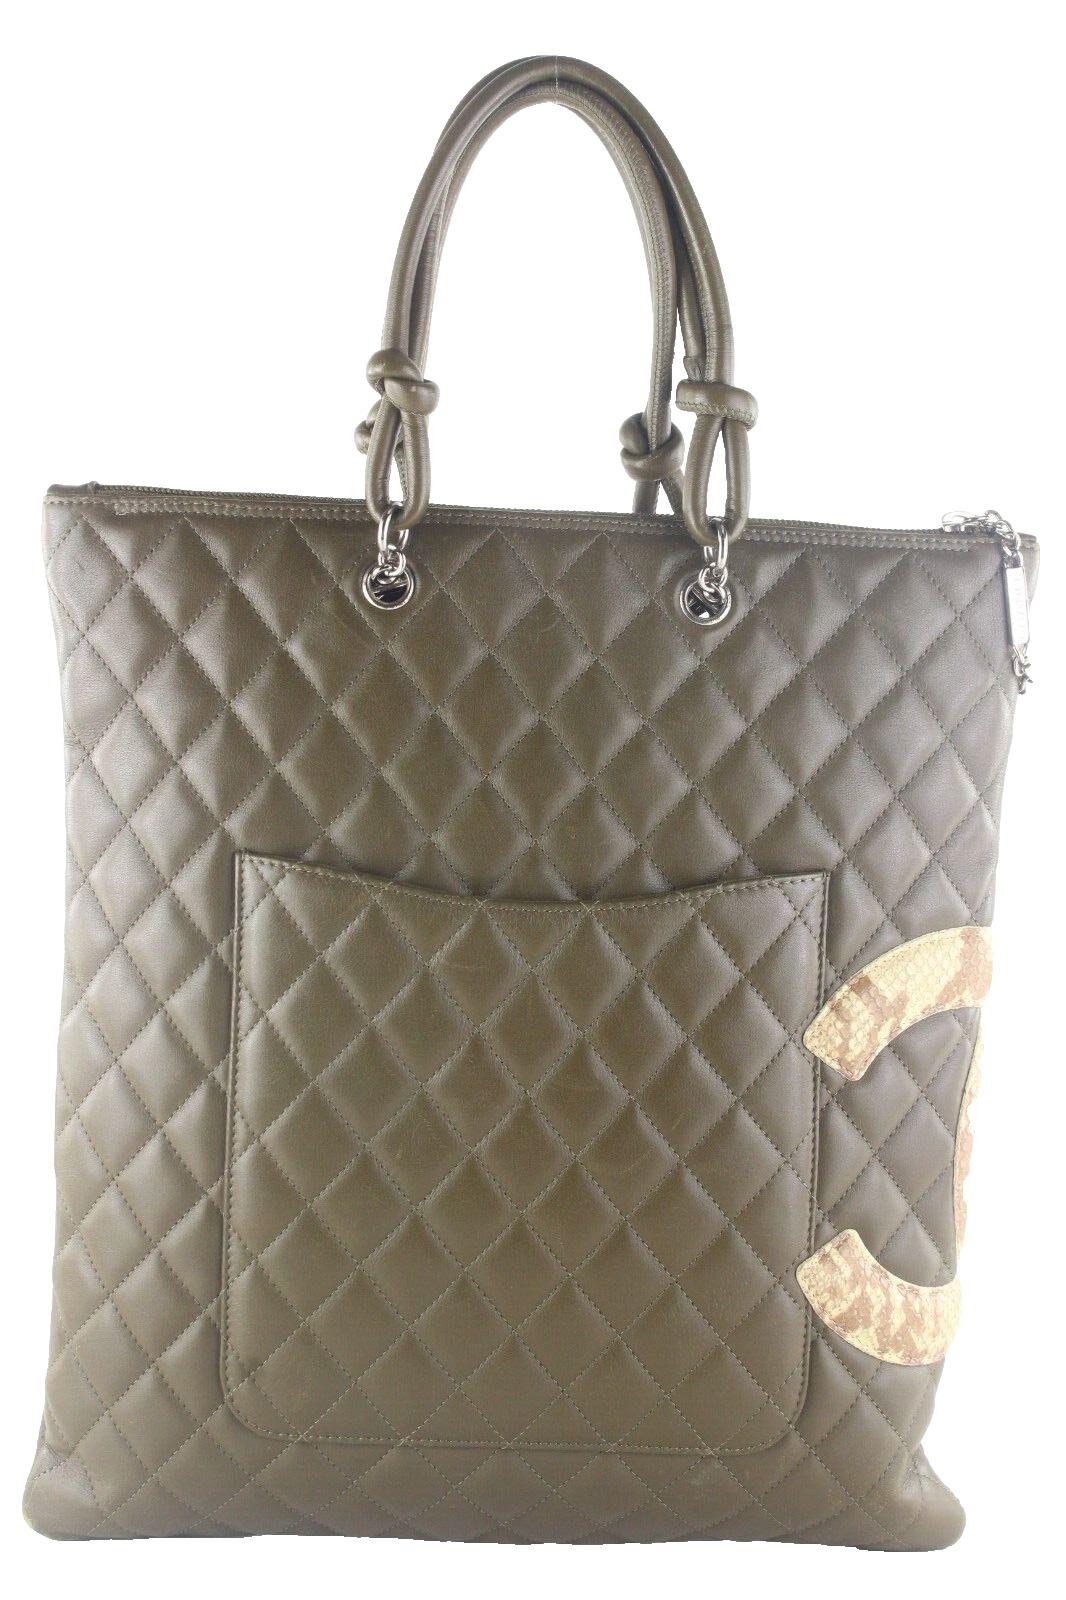 Gray Chanel Khaki Olive Leather Quilted Cambon Tote 3CAS1023K For Sale